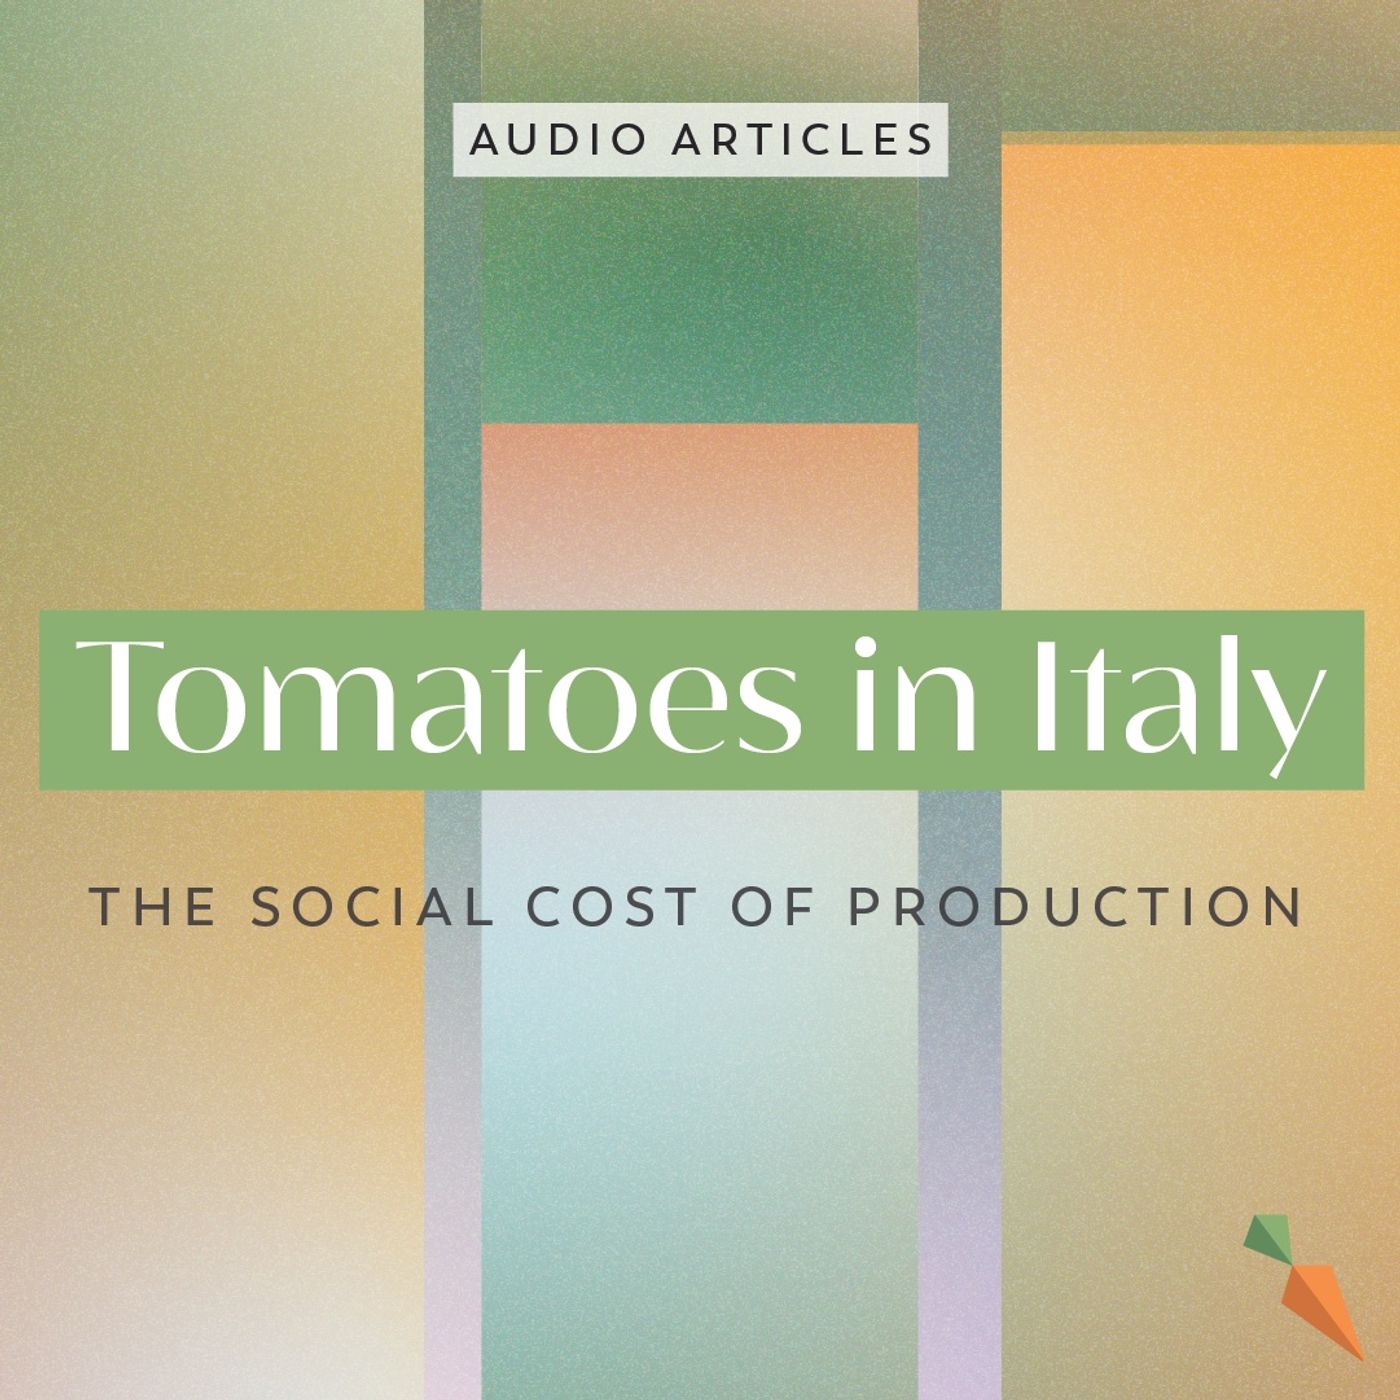 Tomatoes in Italy: The Social Cost of Production | FoodUnfolded AudioArticle